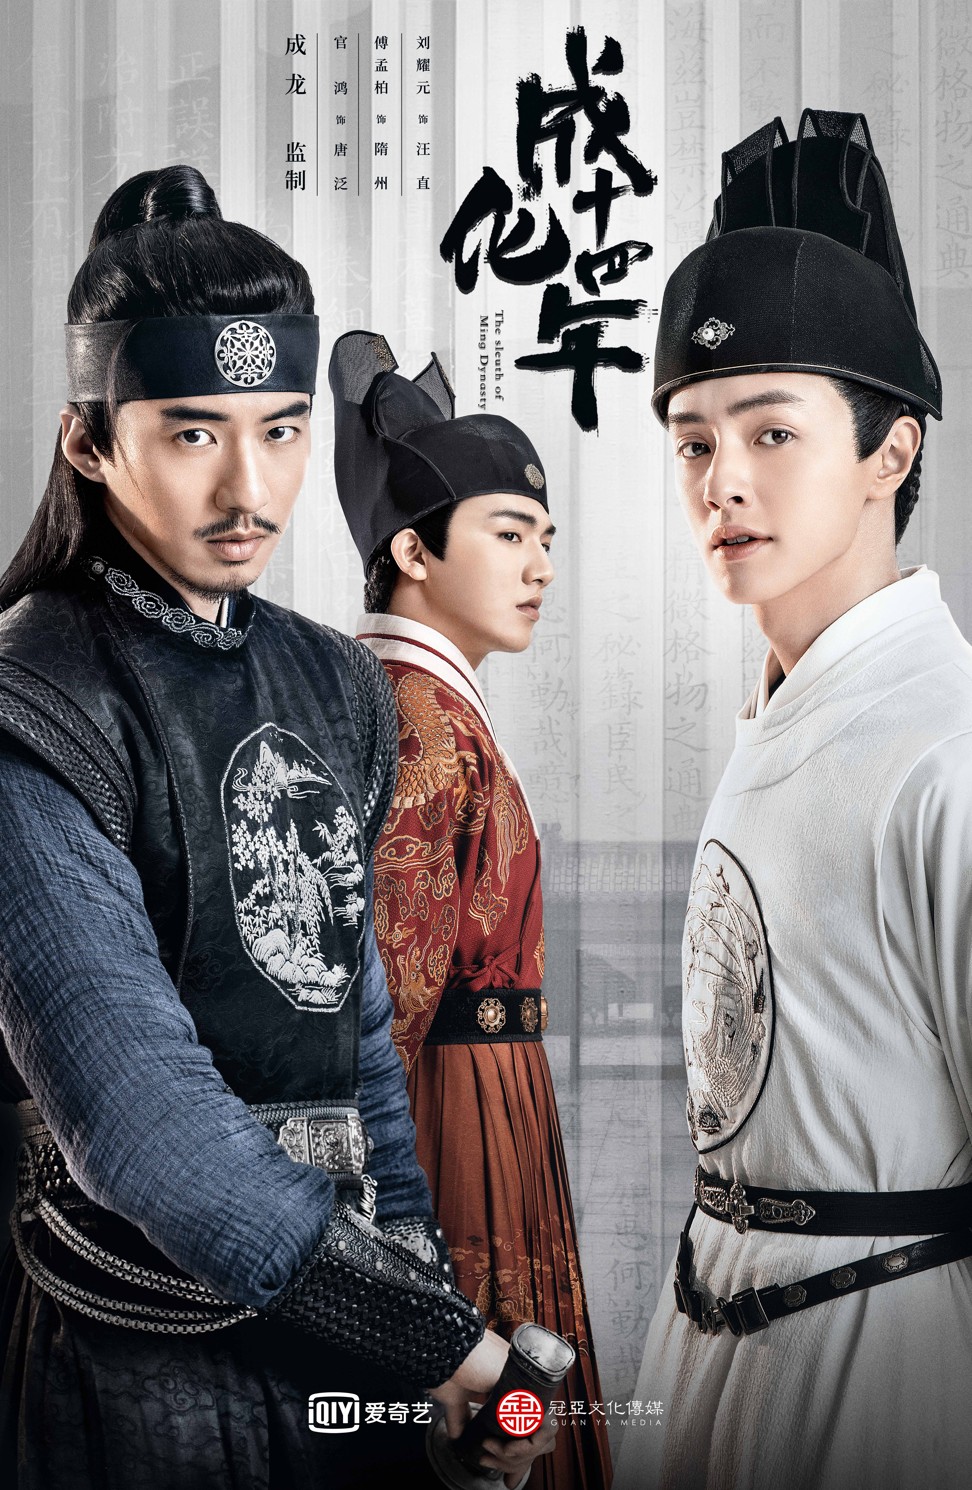 The Sleuth of Ming dynasty is a Sherlock Holmes-style detective story produced by Jackie Chan.